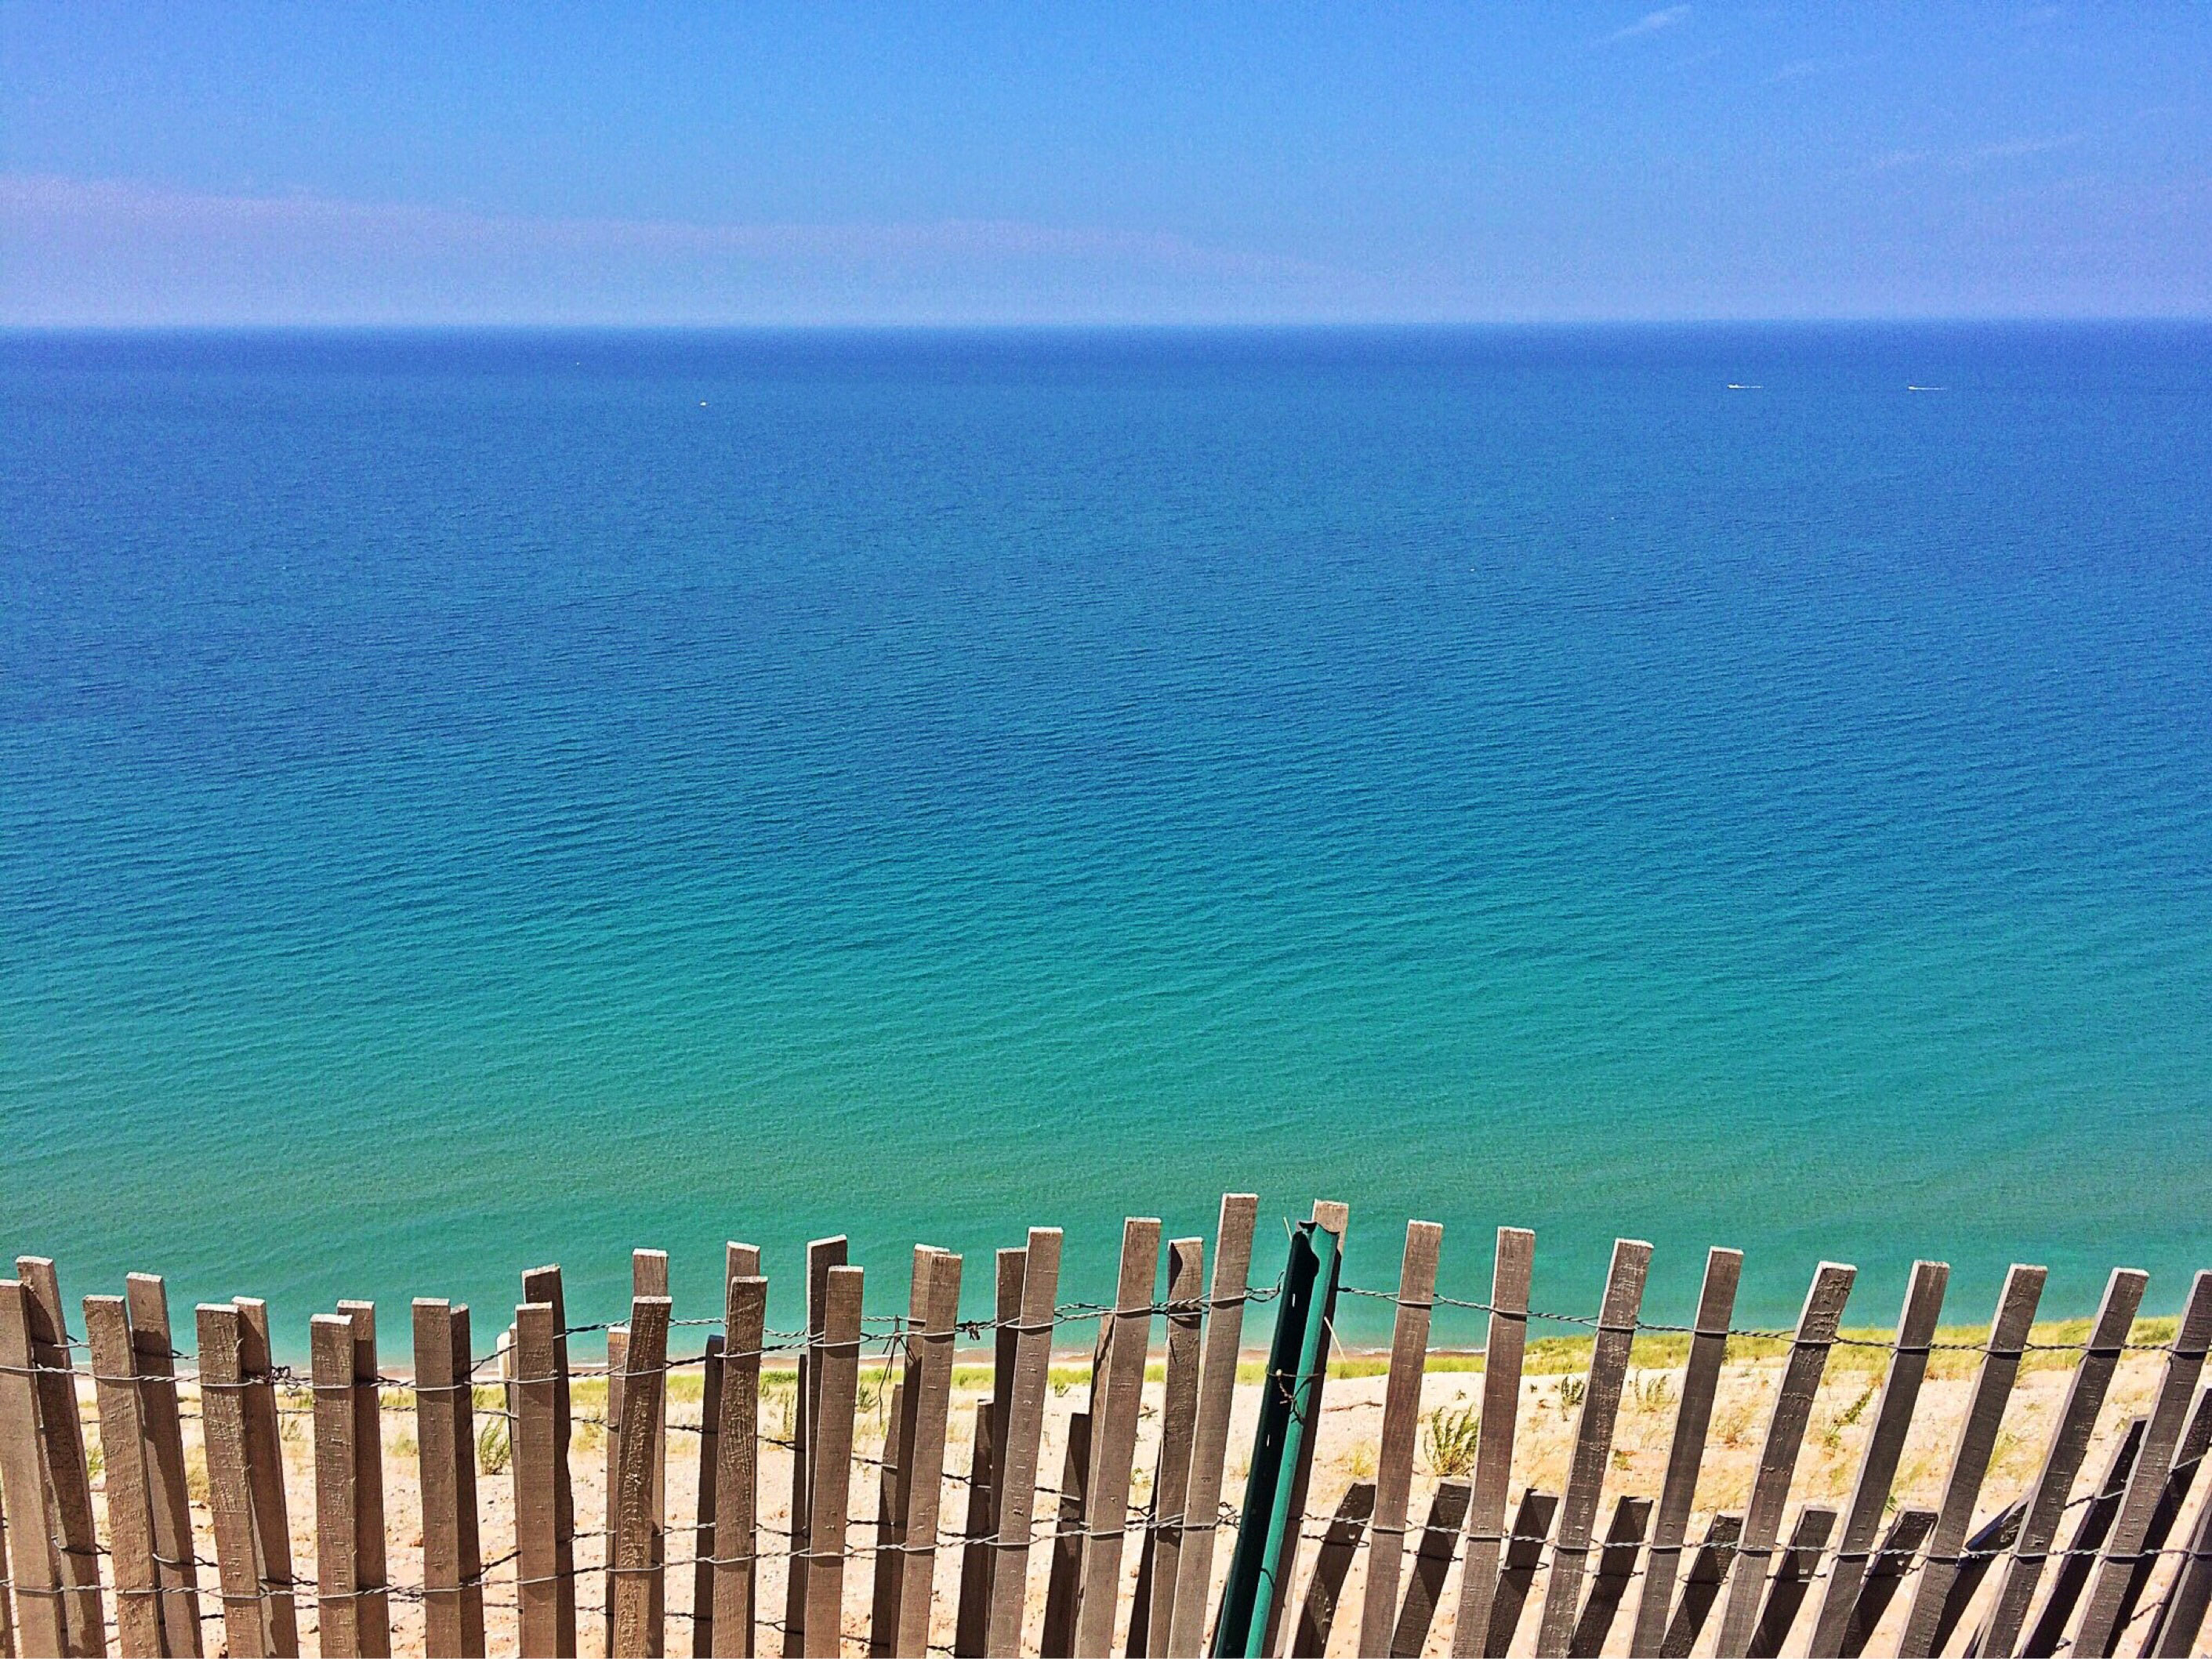 landscape-and-seascape-of-the-great-lakes-and-beach-in-michigan.jpg